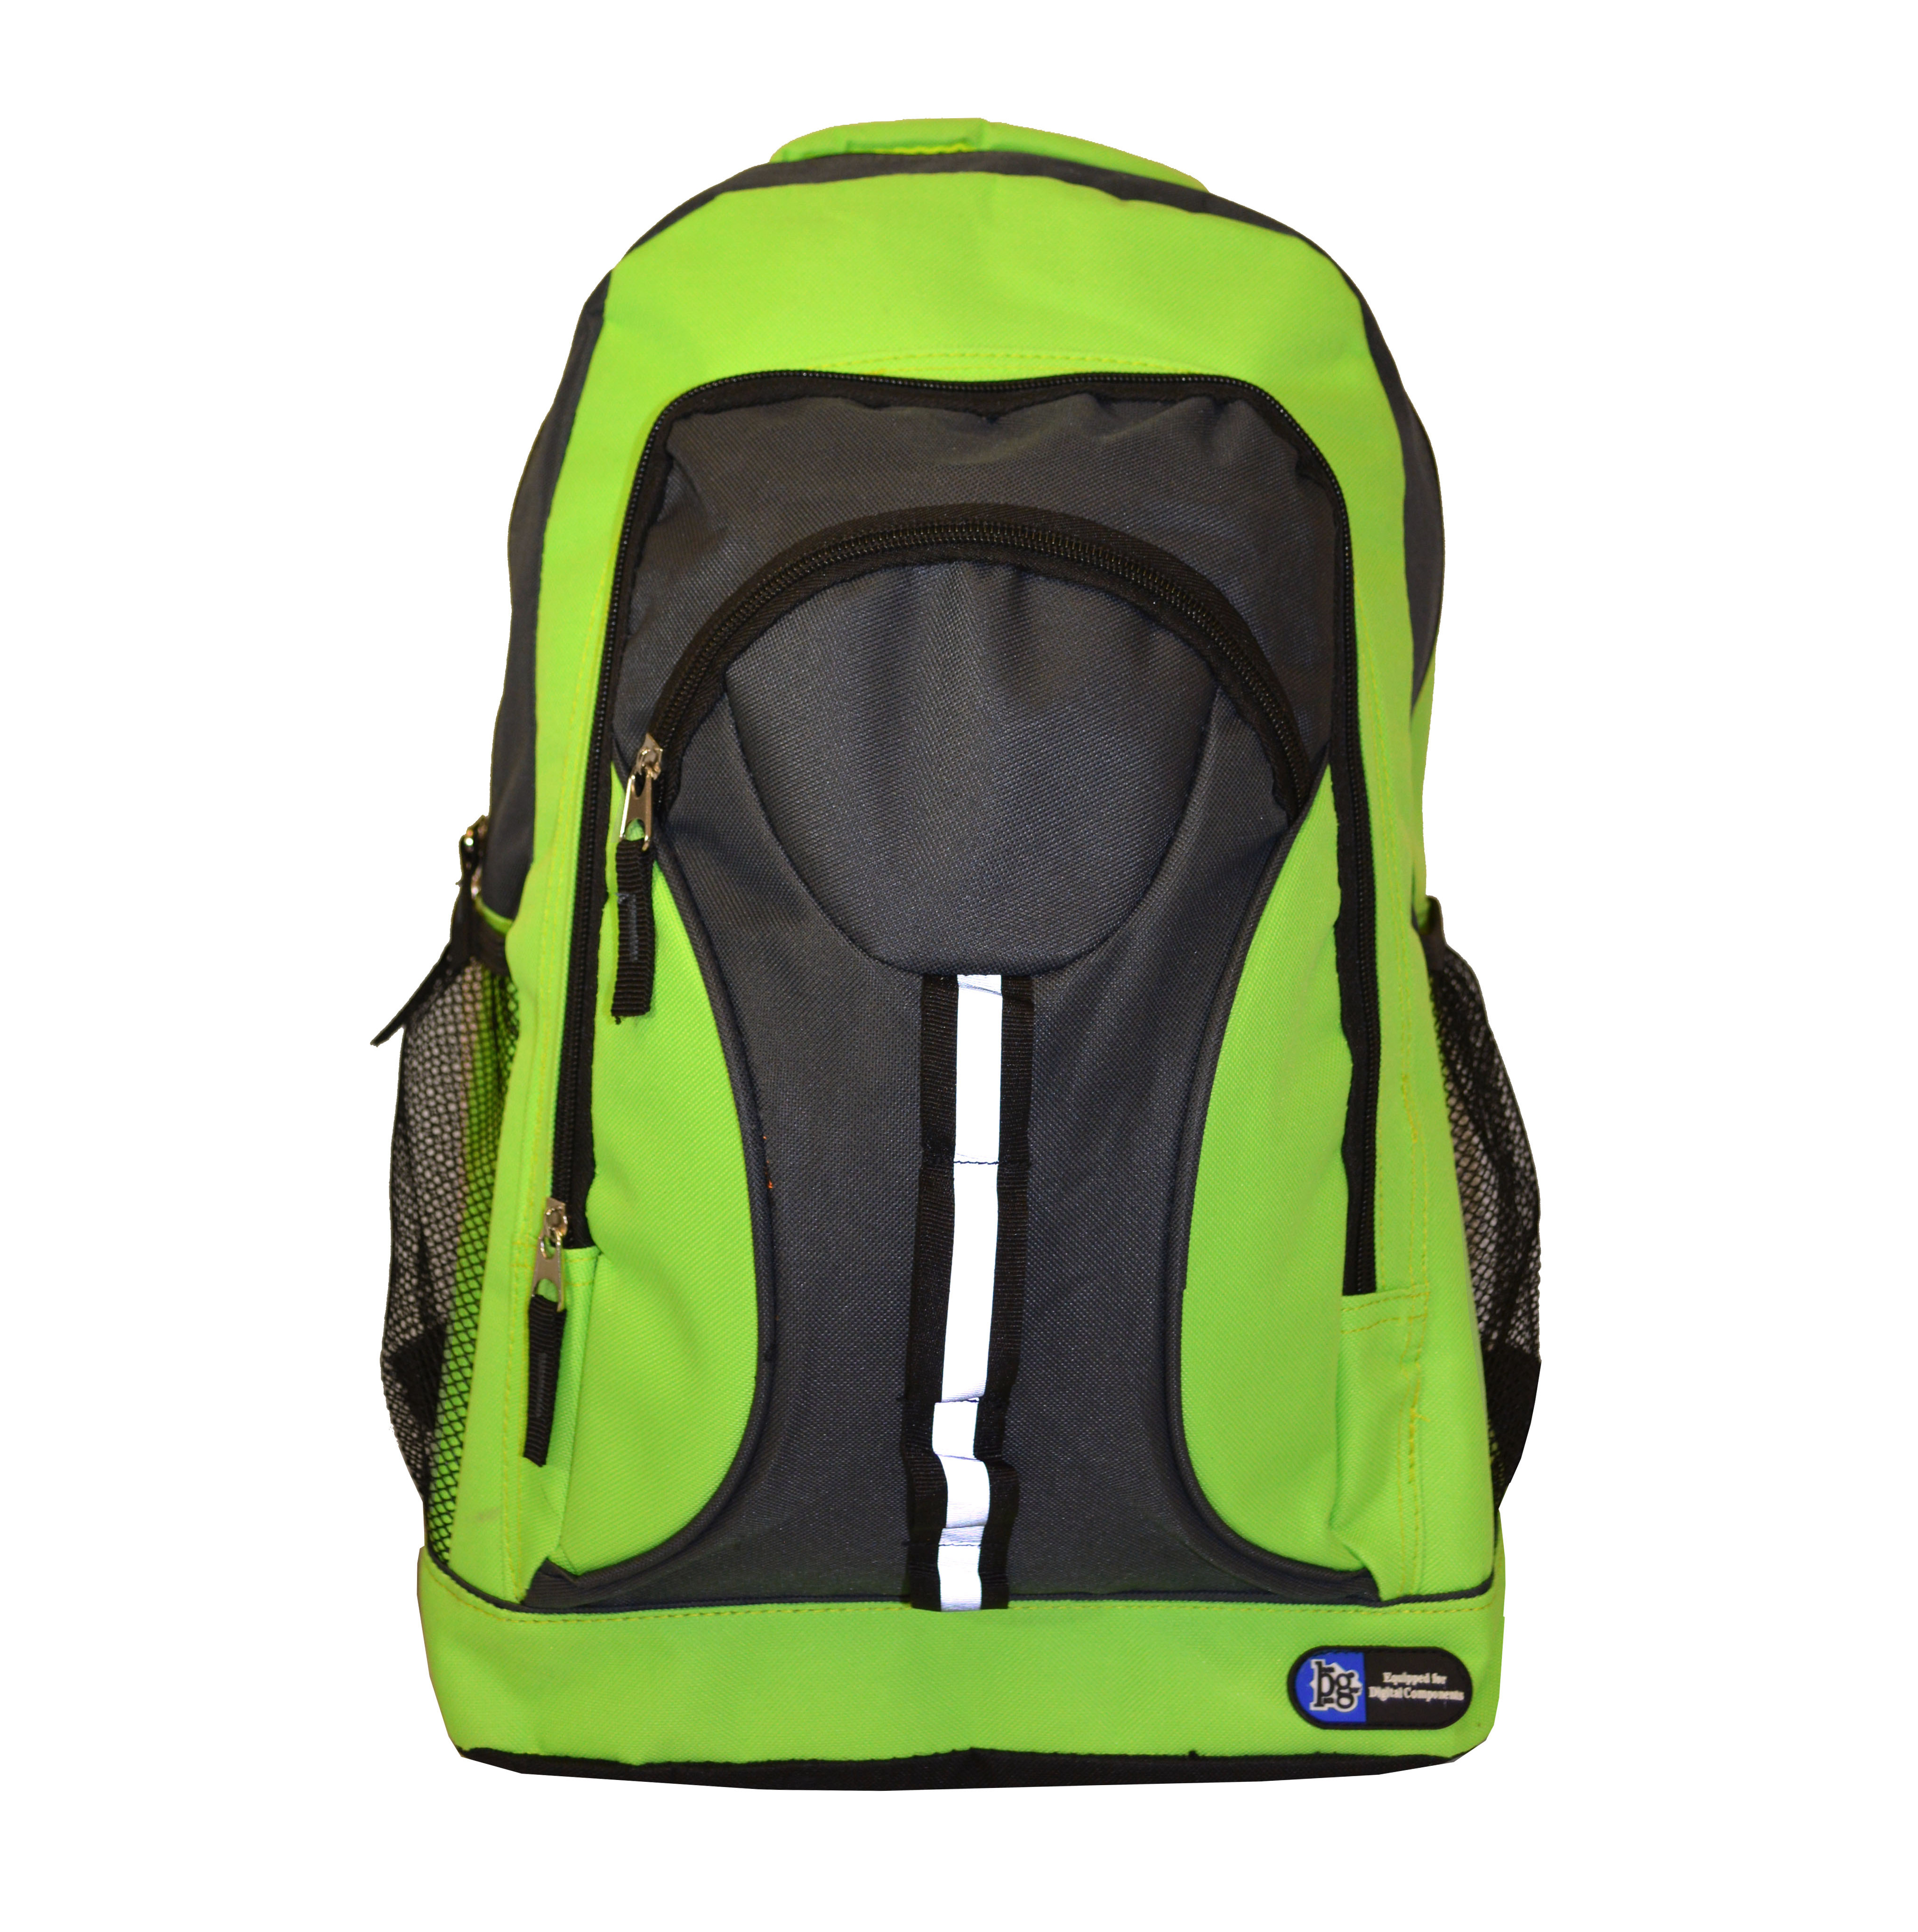 Backpack 18″ inches (001-BP685) Case Price $225.00/9.00 each | Backpack ...